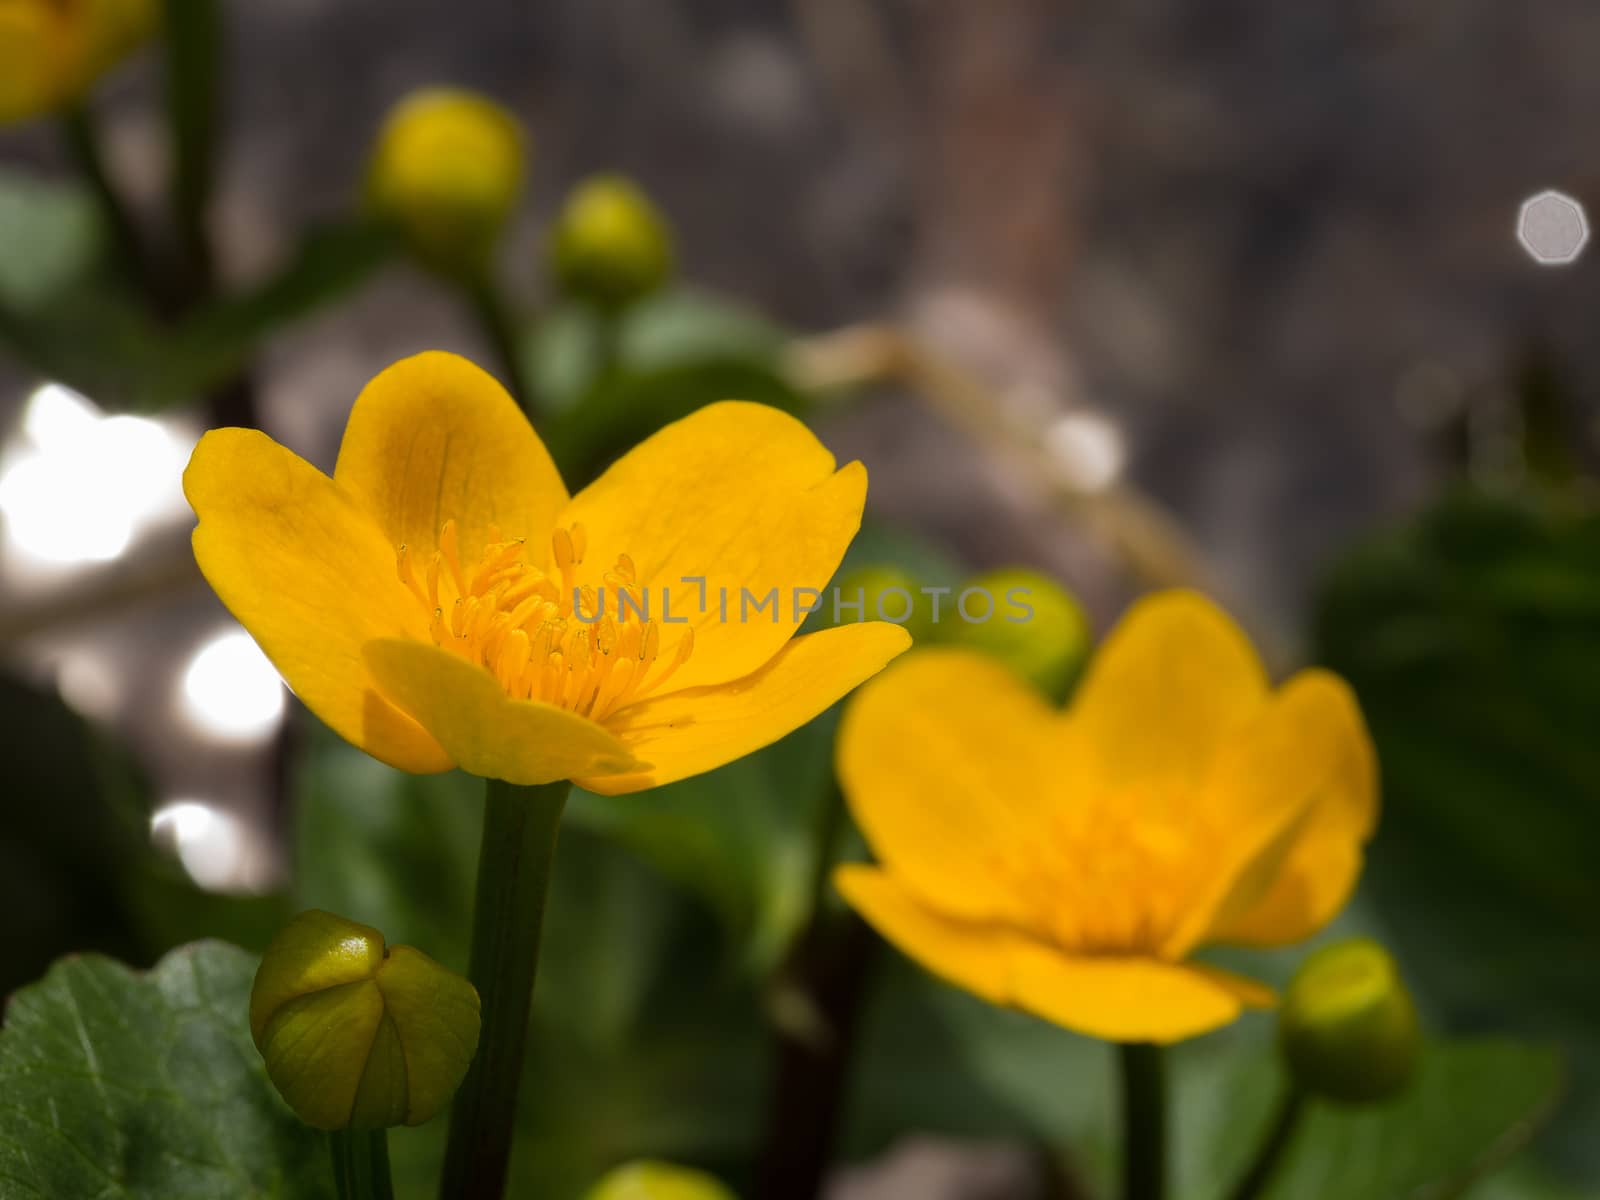 This small yellow flower very much resembles a buttercup